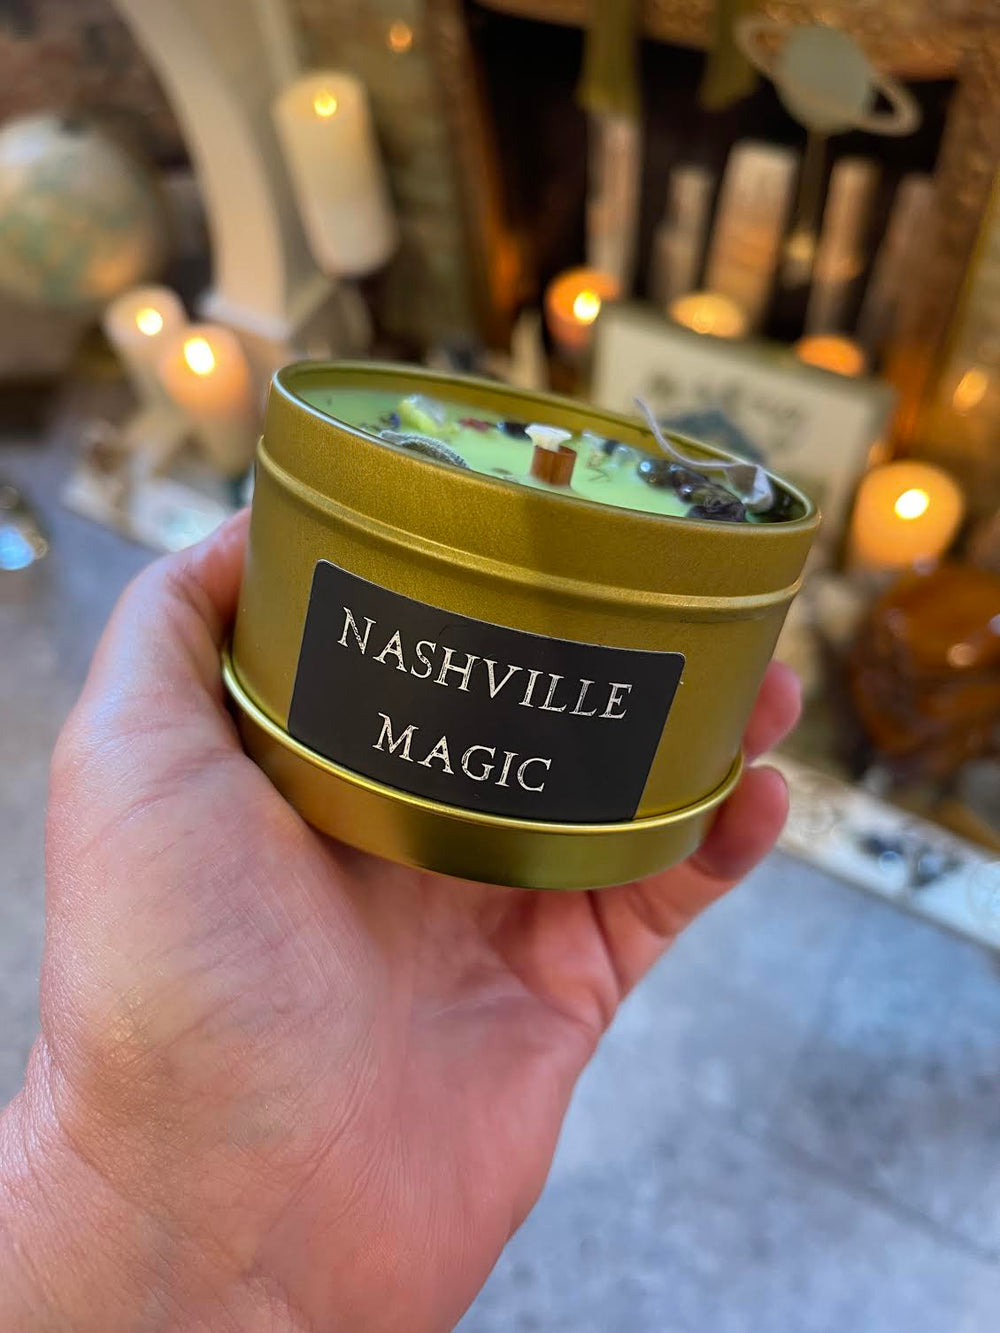 This is the front of the Nashville Magic candle